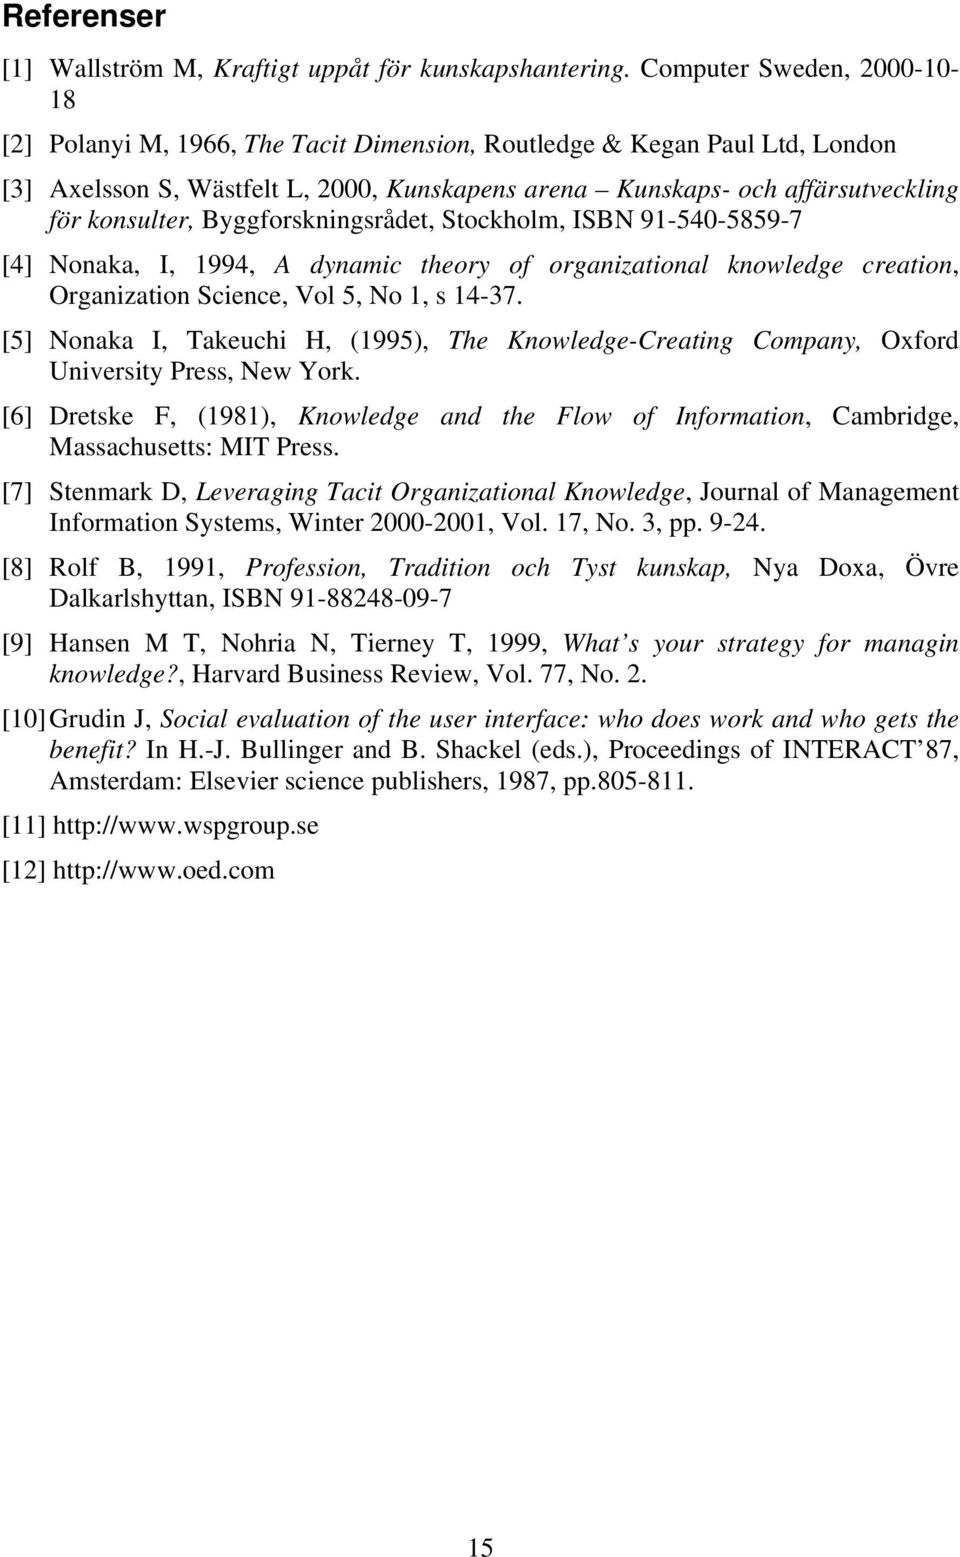 konsulter, Byggforskningsrådet, Stockholm, ISBN 91-540-5859-7 [4] Nonaka, I, 1994, A dynamic theory of organizational knowledge creation, Organization Science, Vol 5, No 1, s 14-37.